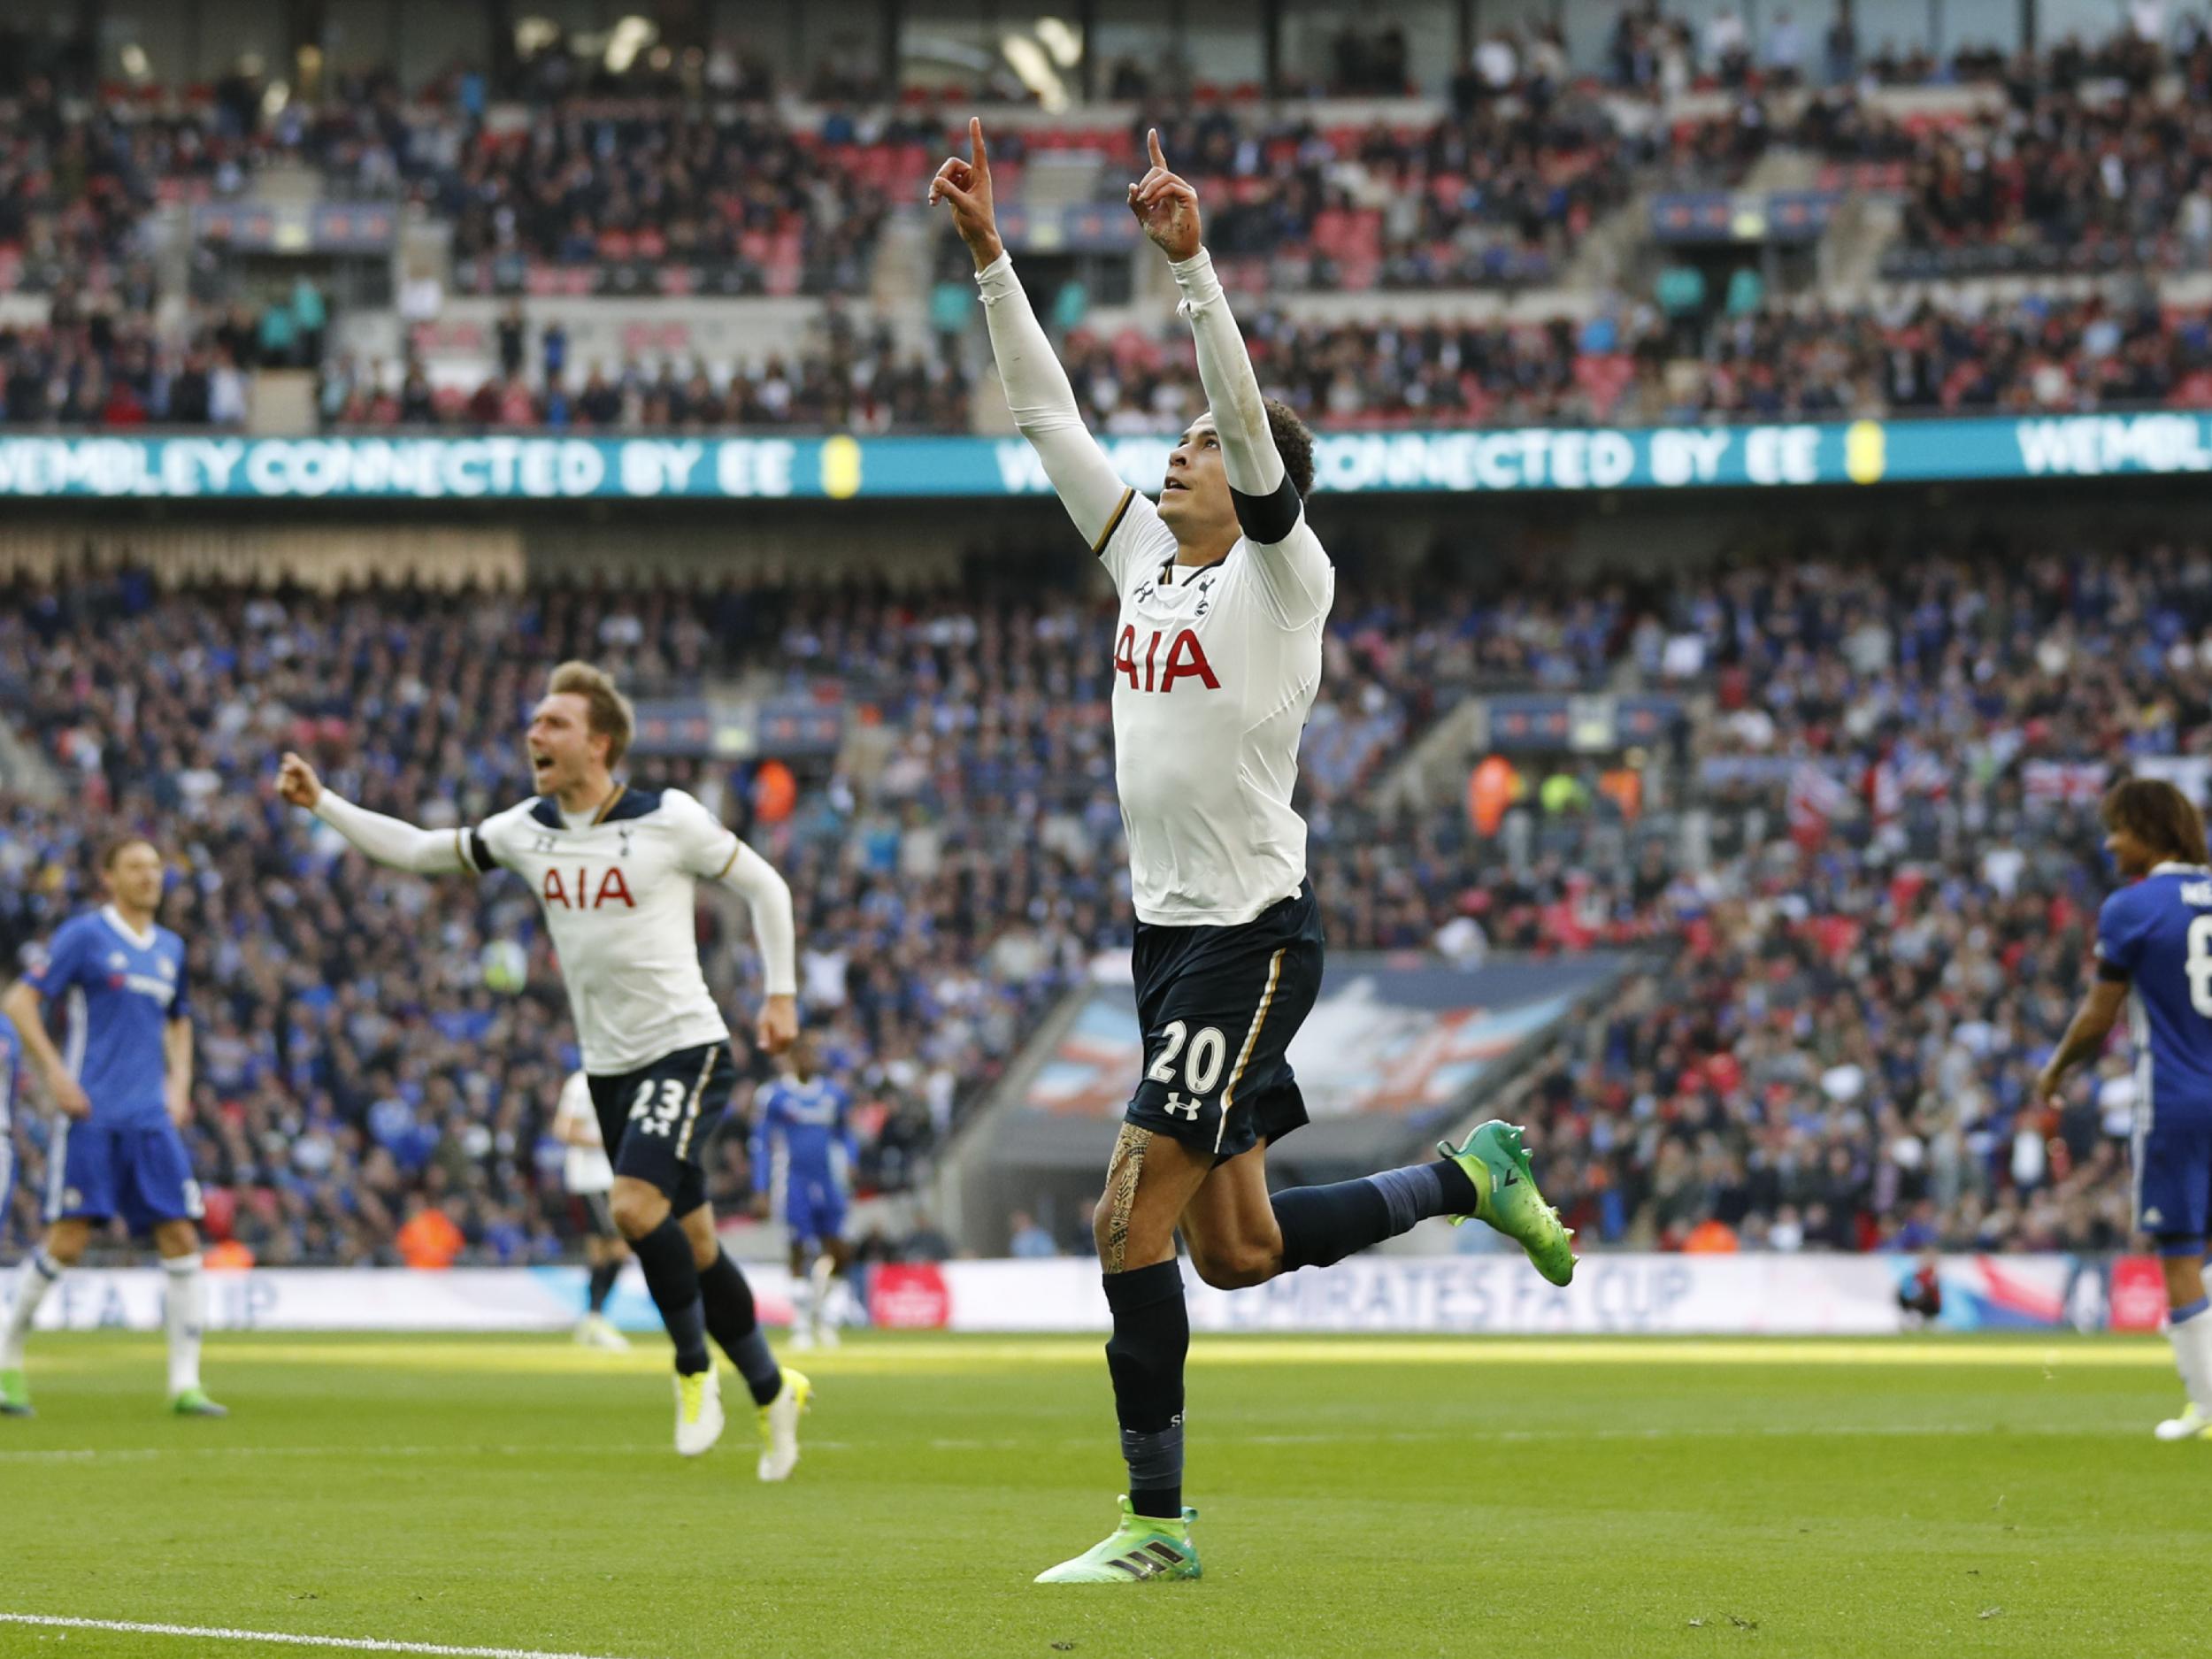 Spurs have a torrid record at Wembley